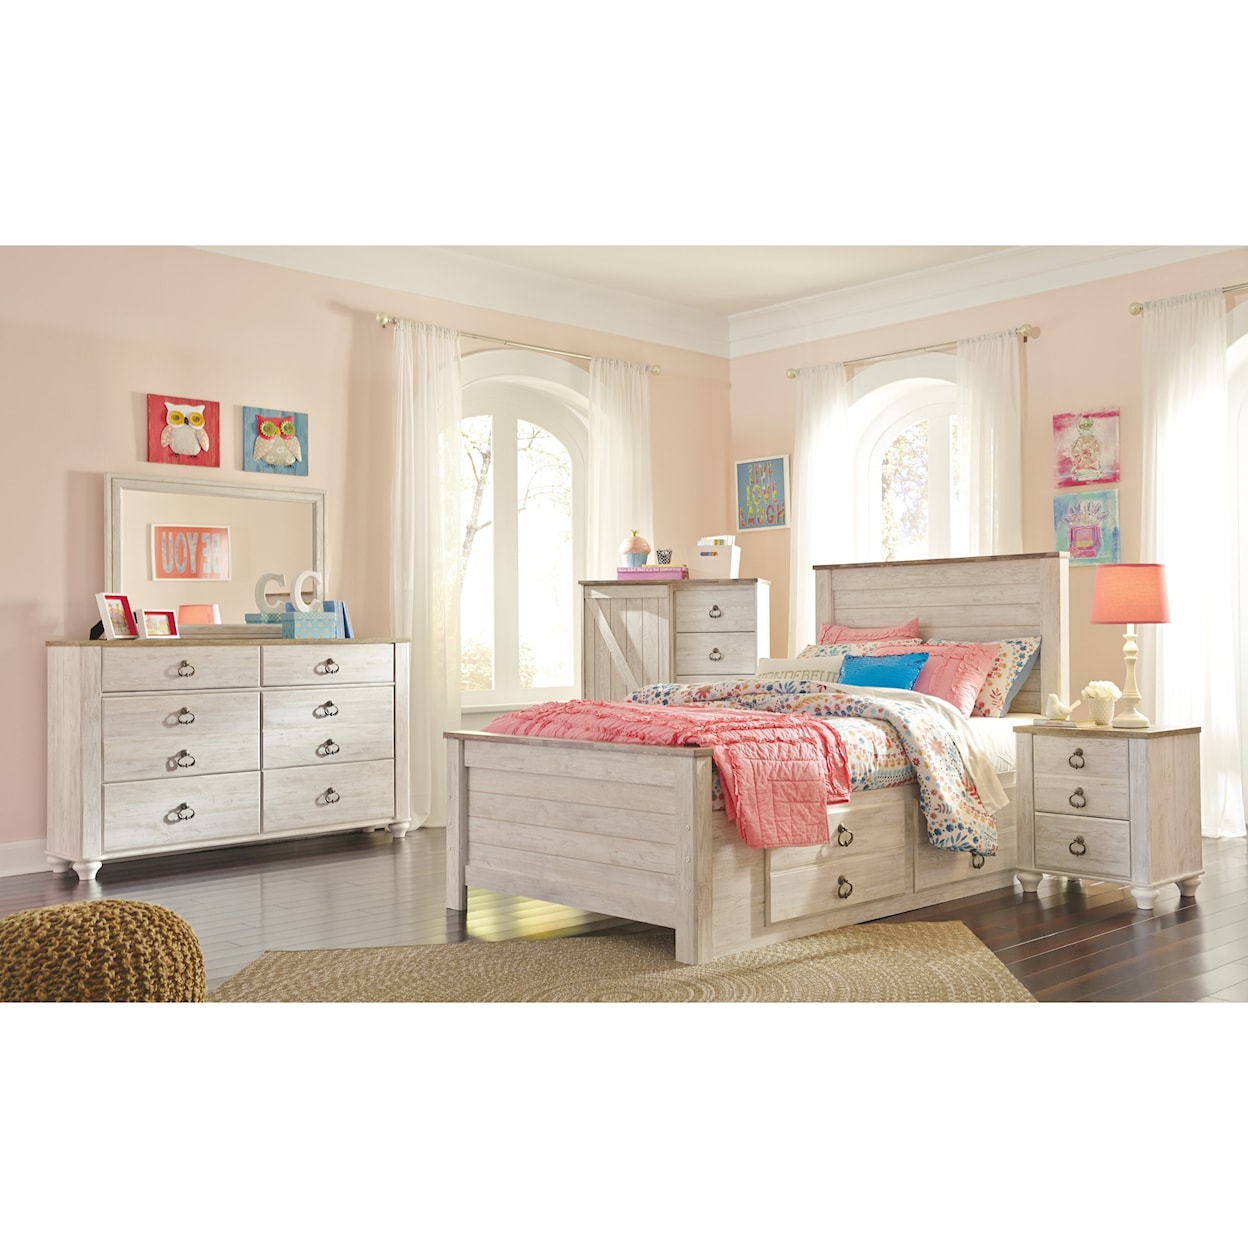 Signature Design by Ashley Willowton Full Bed with Underbed Storage Drawers